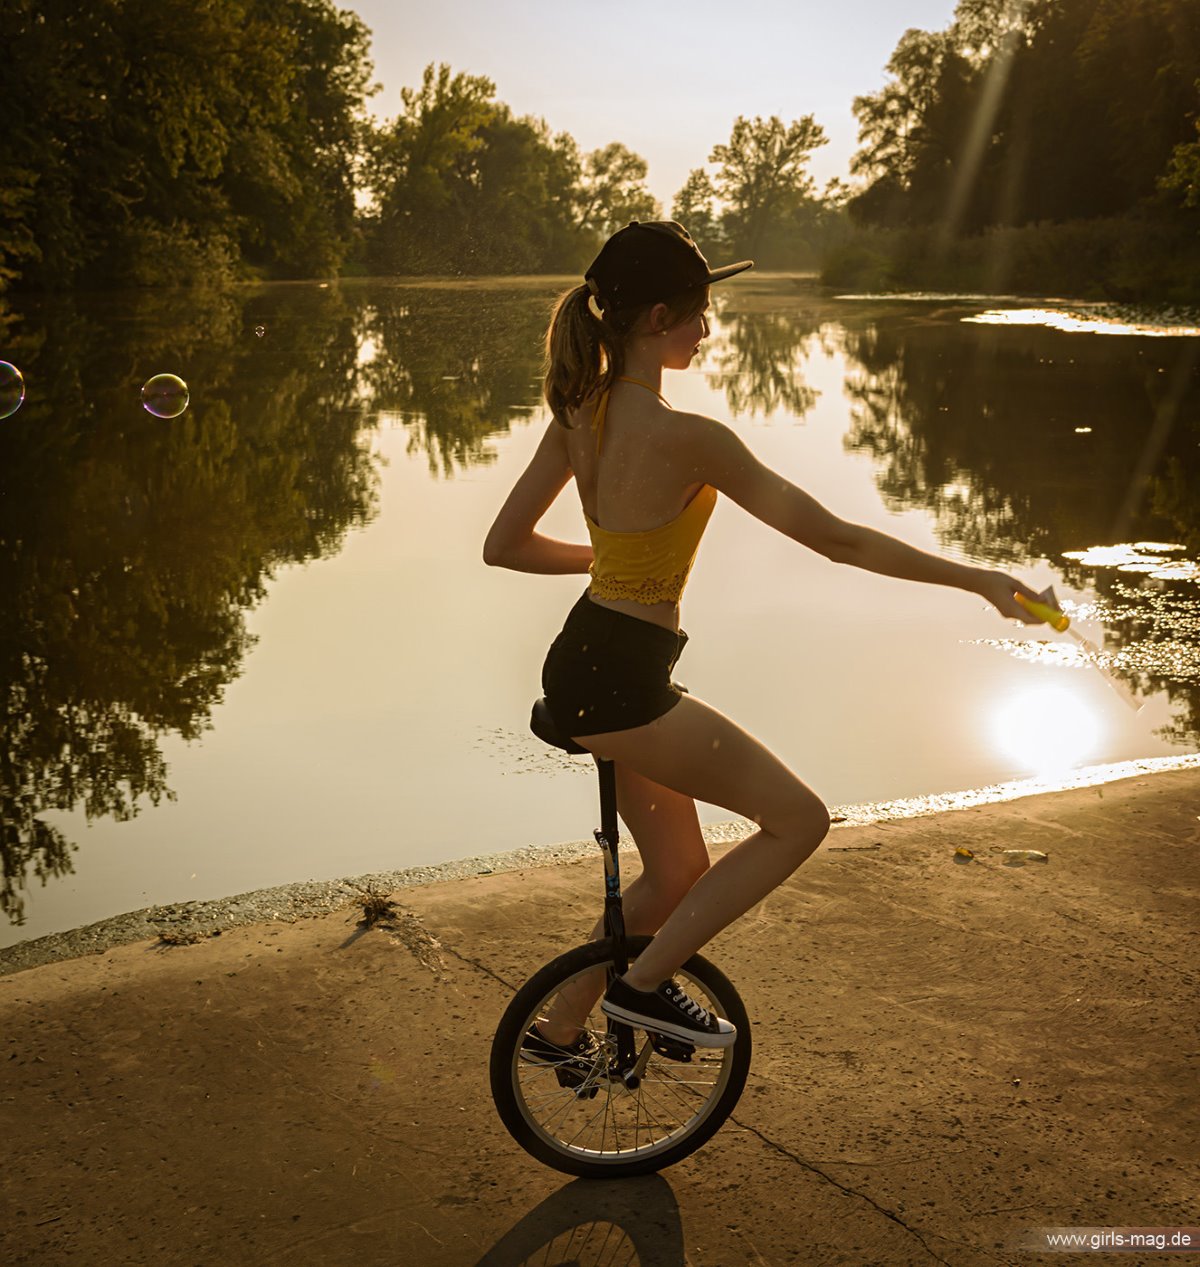 Girls Mag Annika Bubbles on a Unicycle 0098 4348756111.jpg